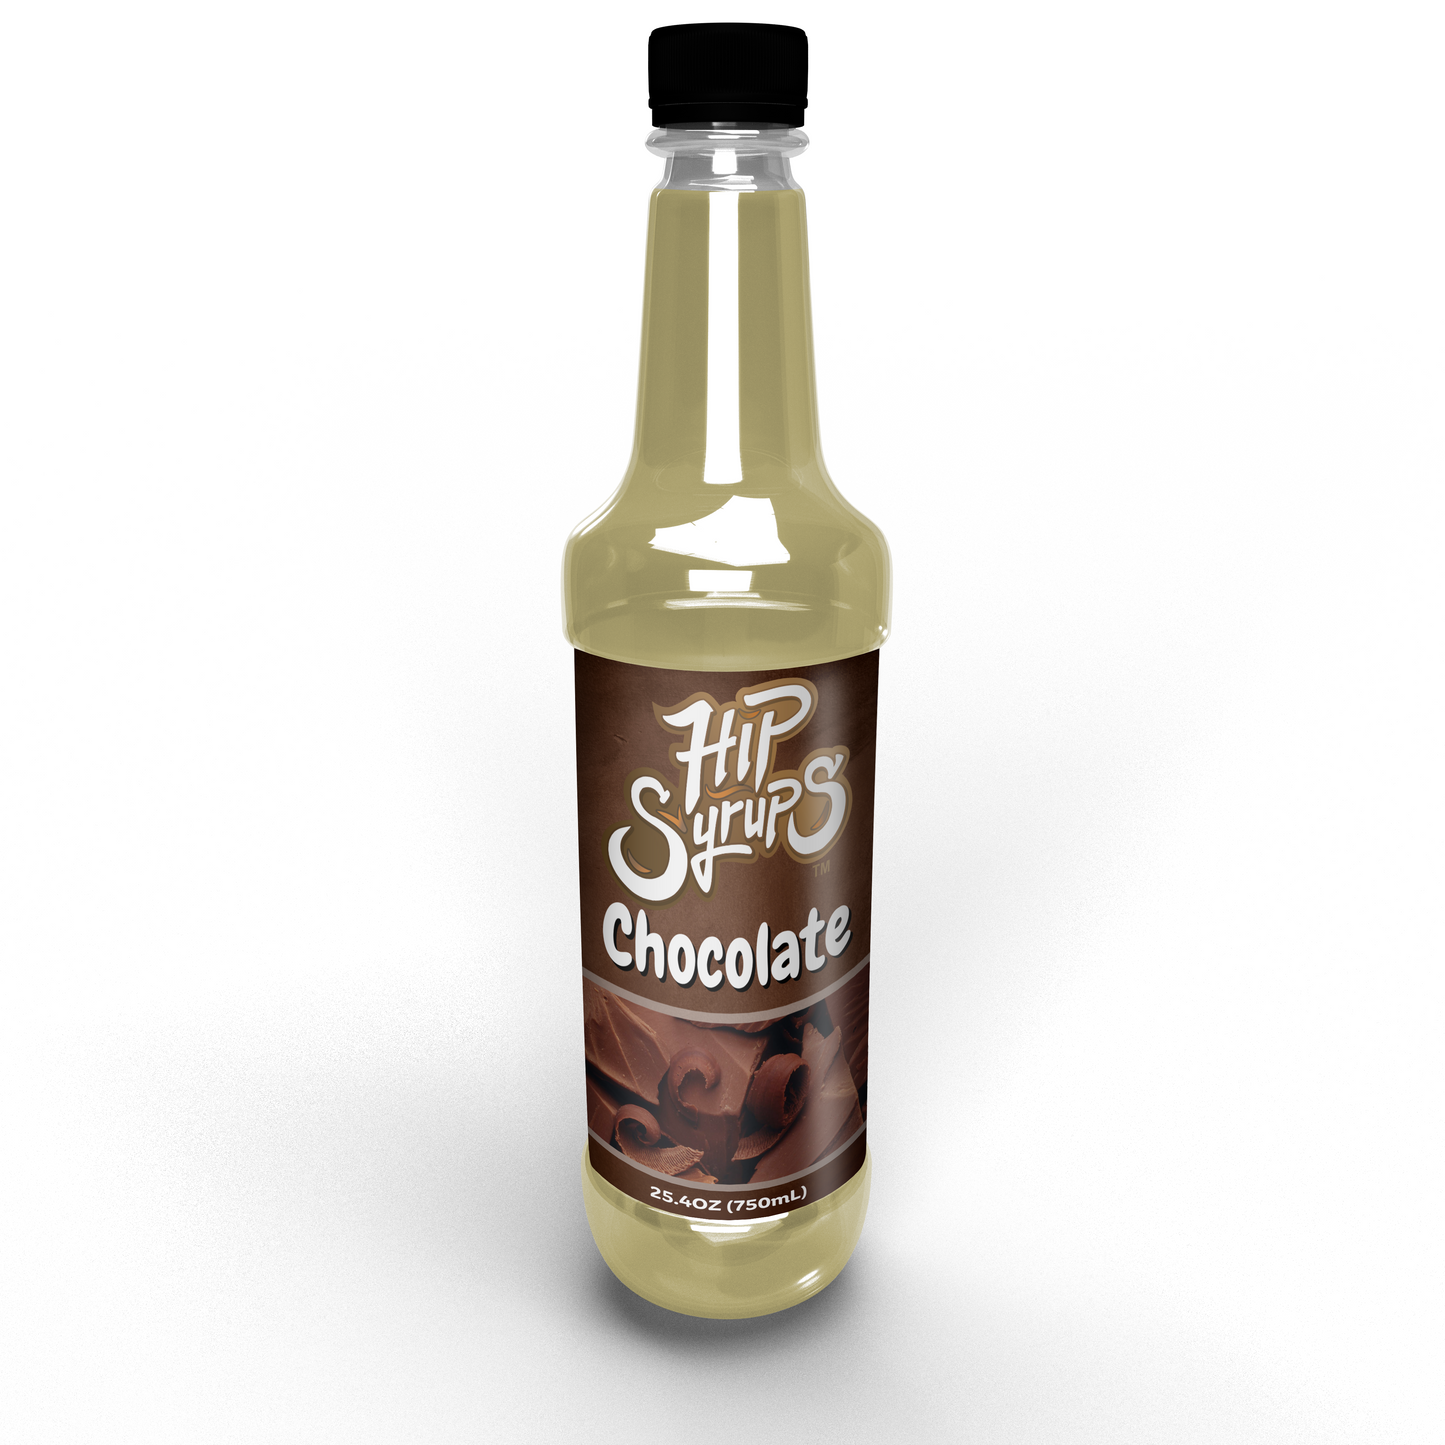 Simple Syrups designed for Chocolate, Coffee, Hot Cocoa